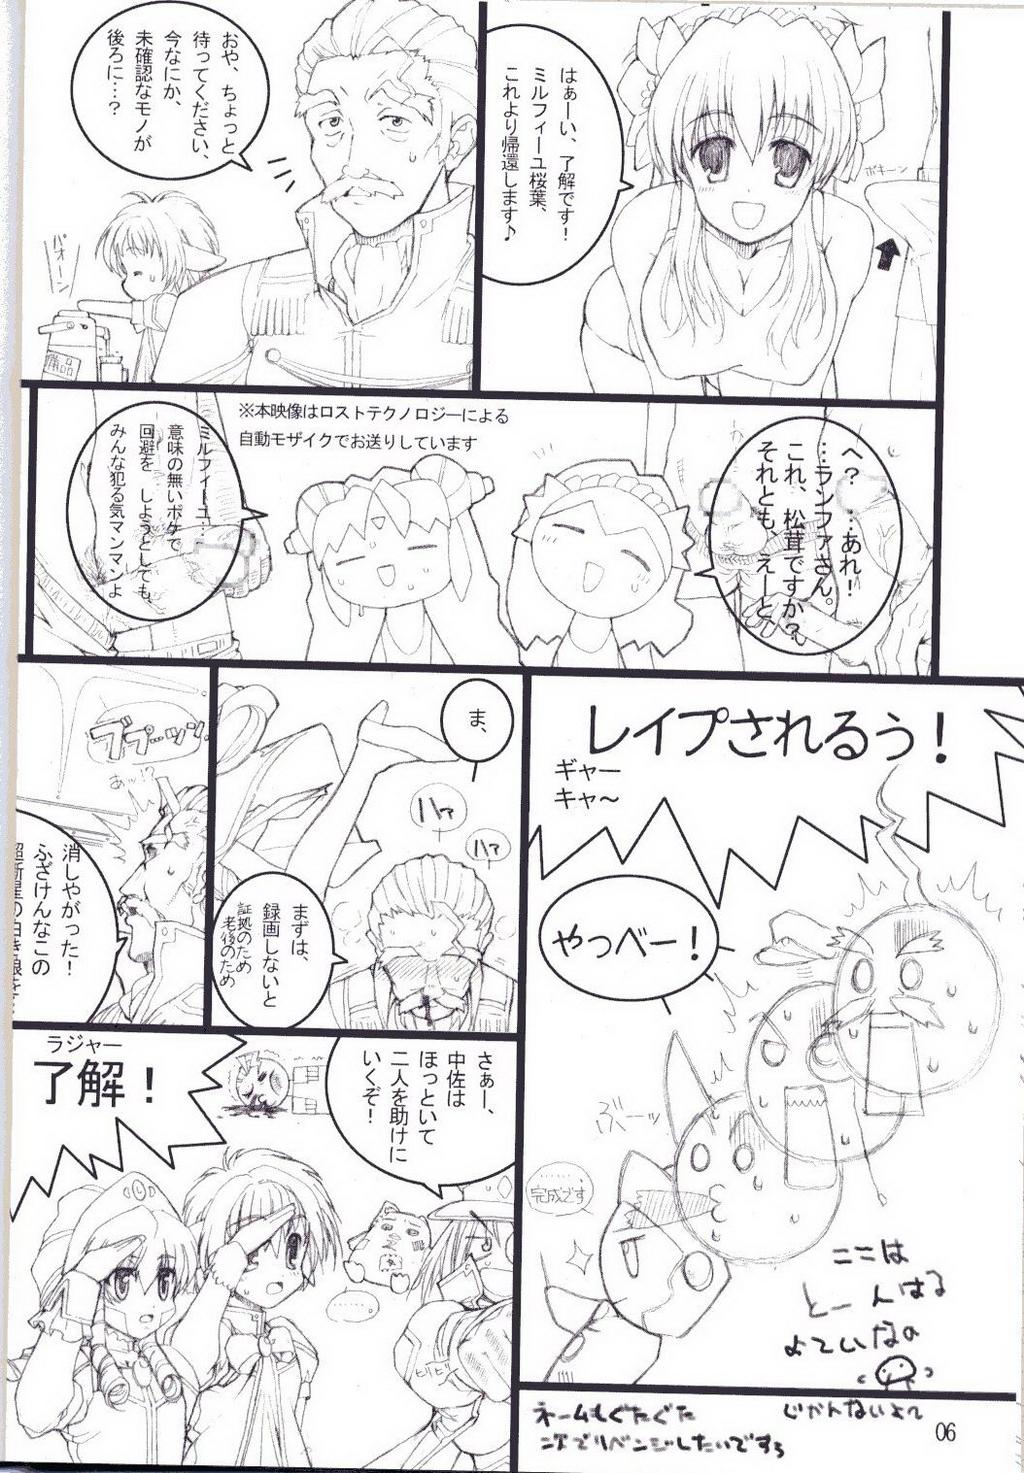 Anale Galaxy Angel Funbook - Galaxy angel Gayemo - Page 5